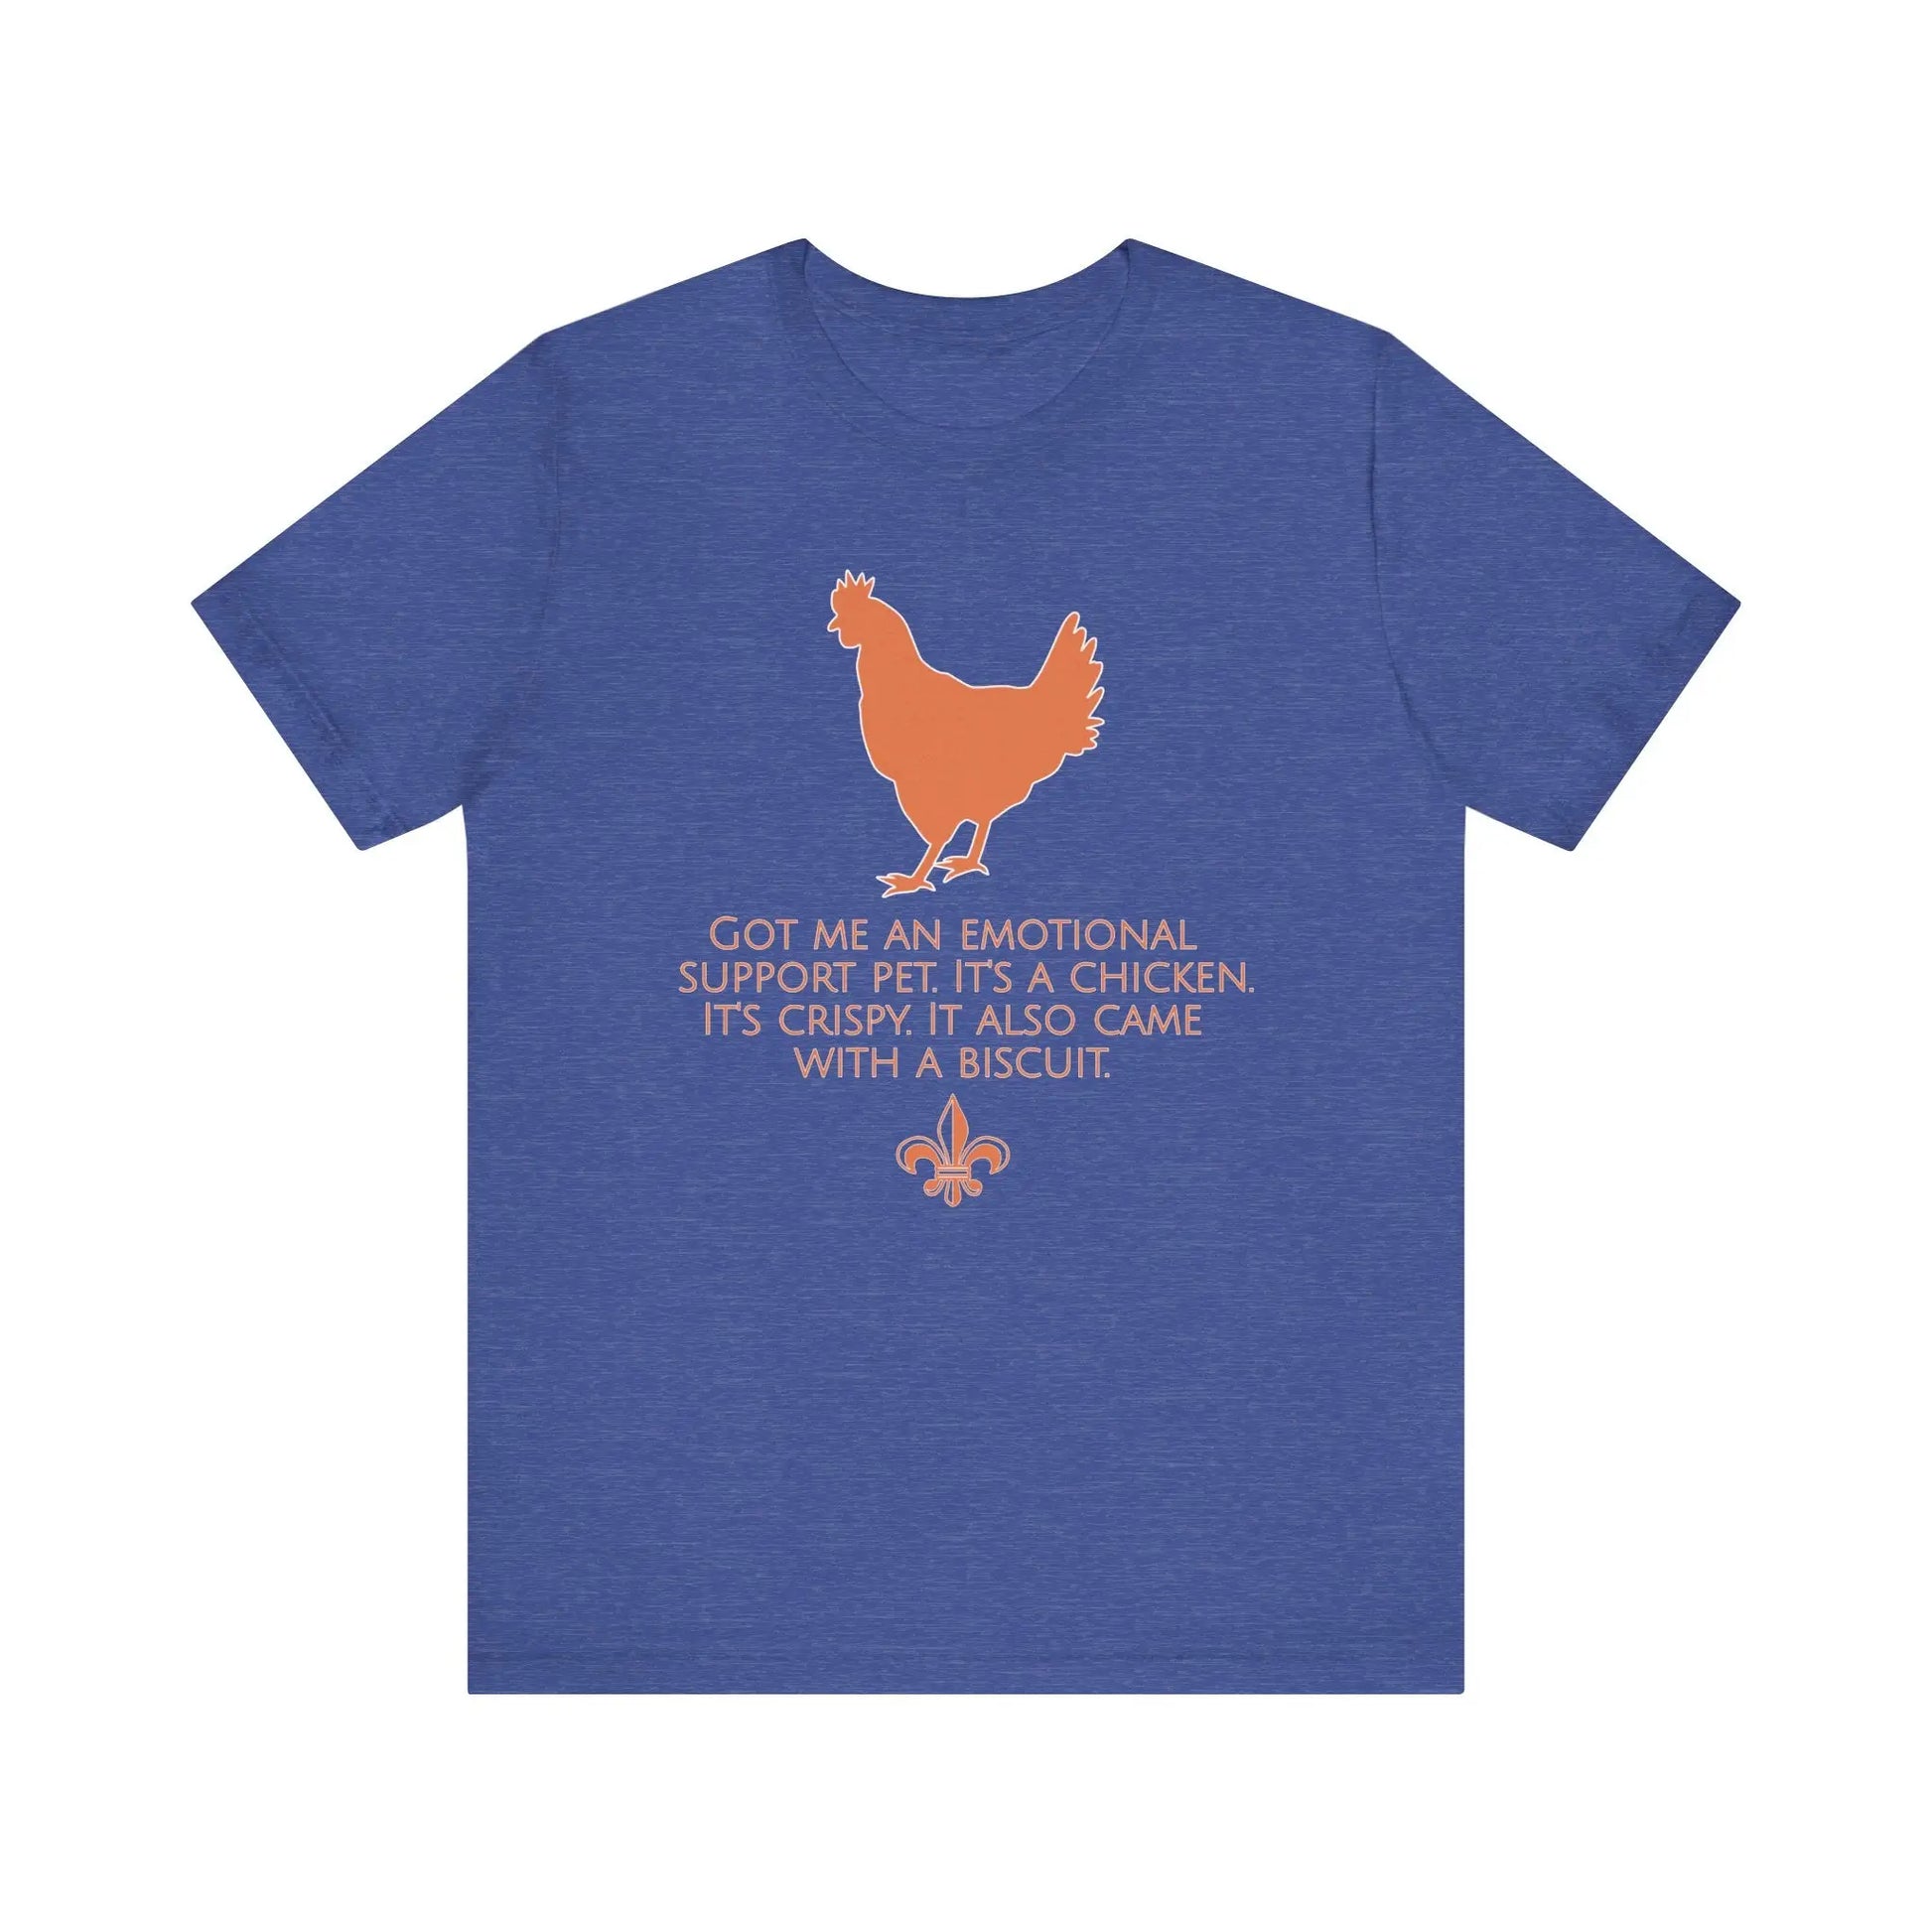 Cluck Yes Men's Jersey Short Sleeve Tee - Wicked Tees